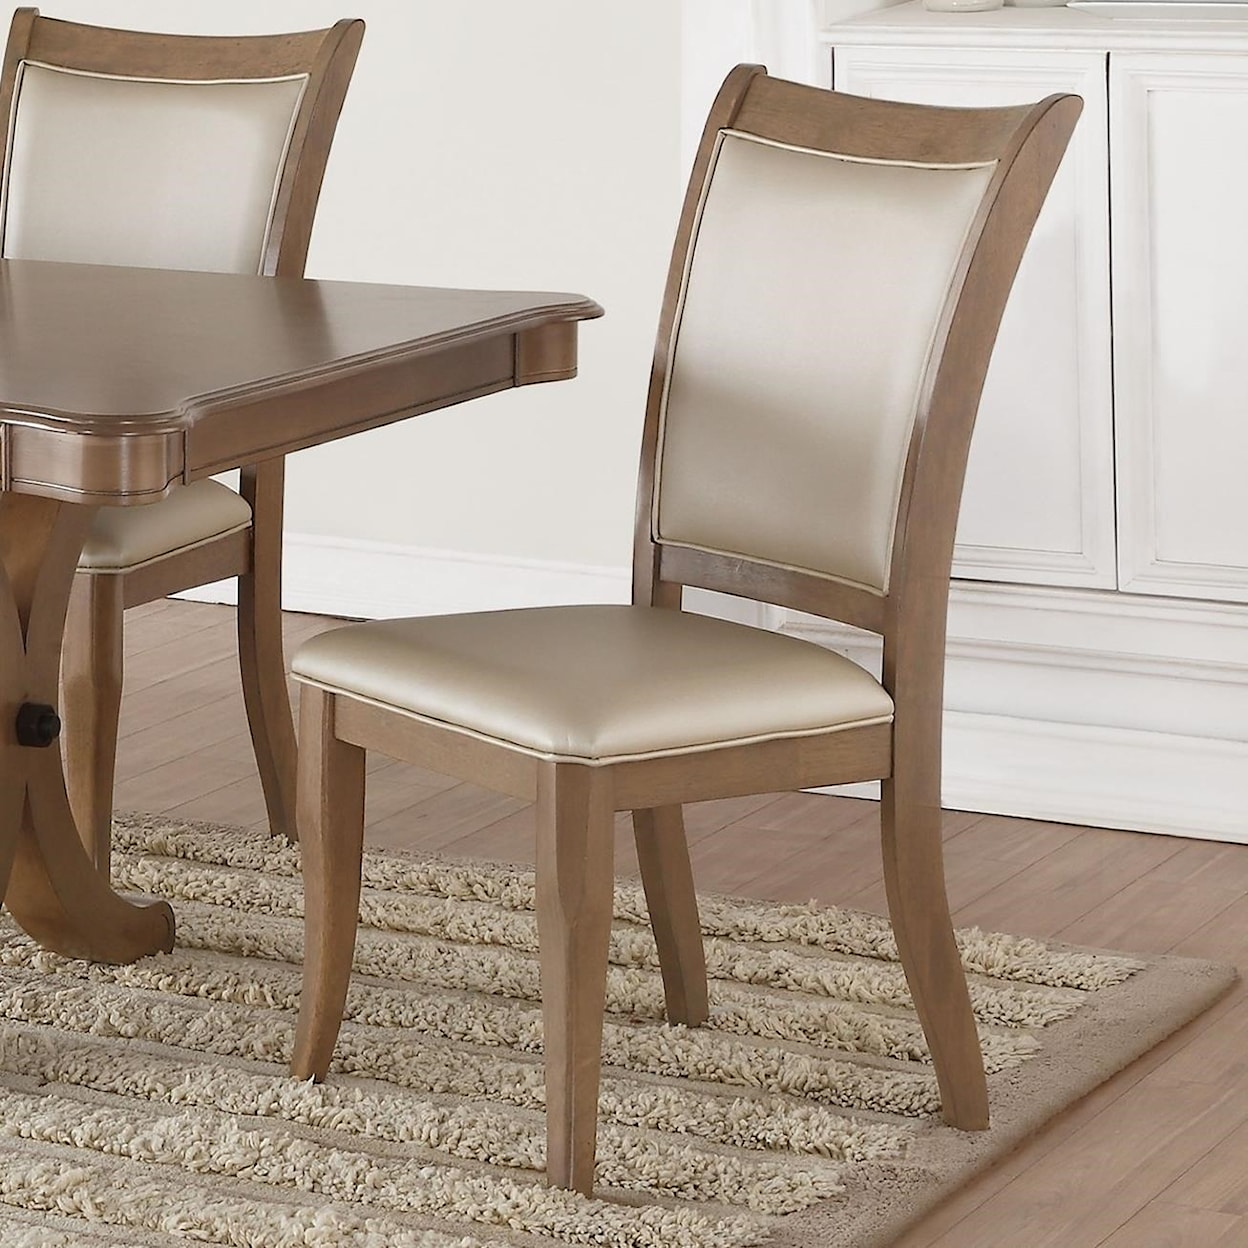 Acme Furniture Harald Dining Side Chair 2-Pack